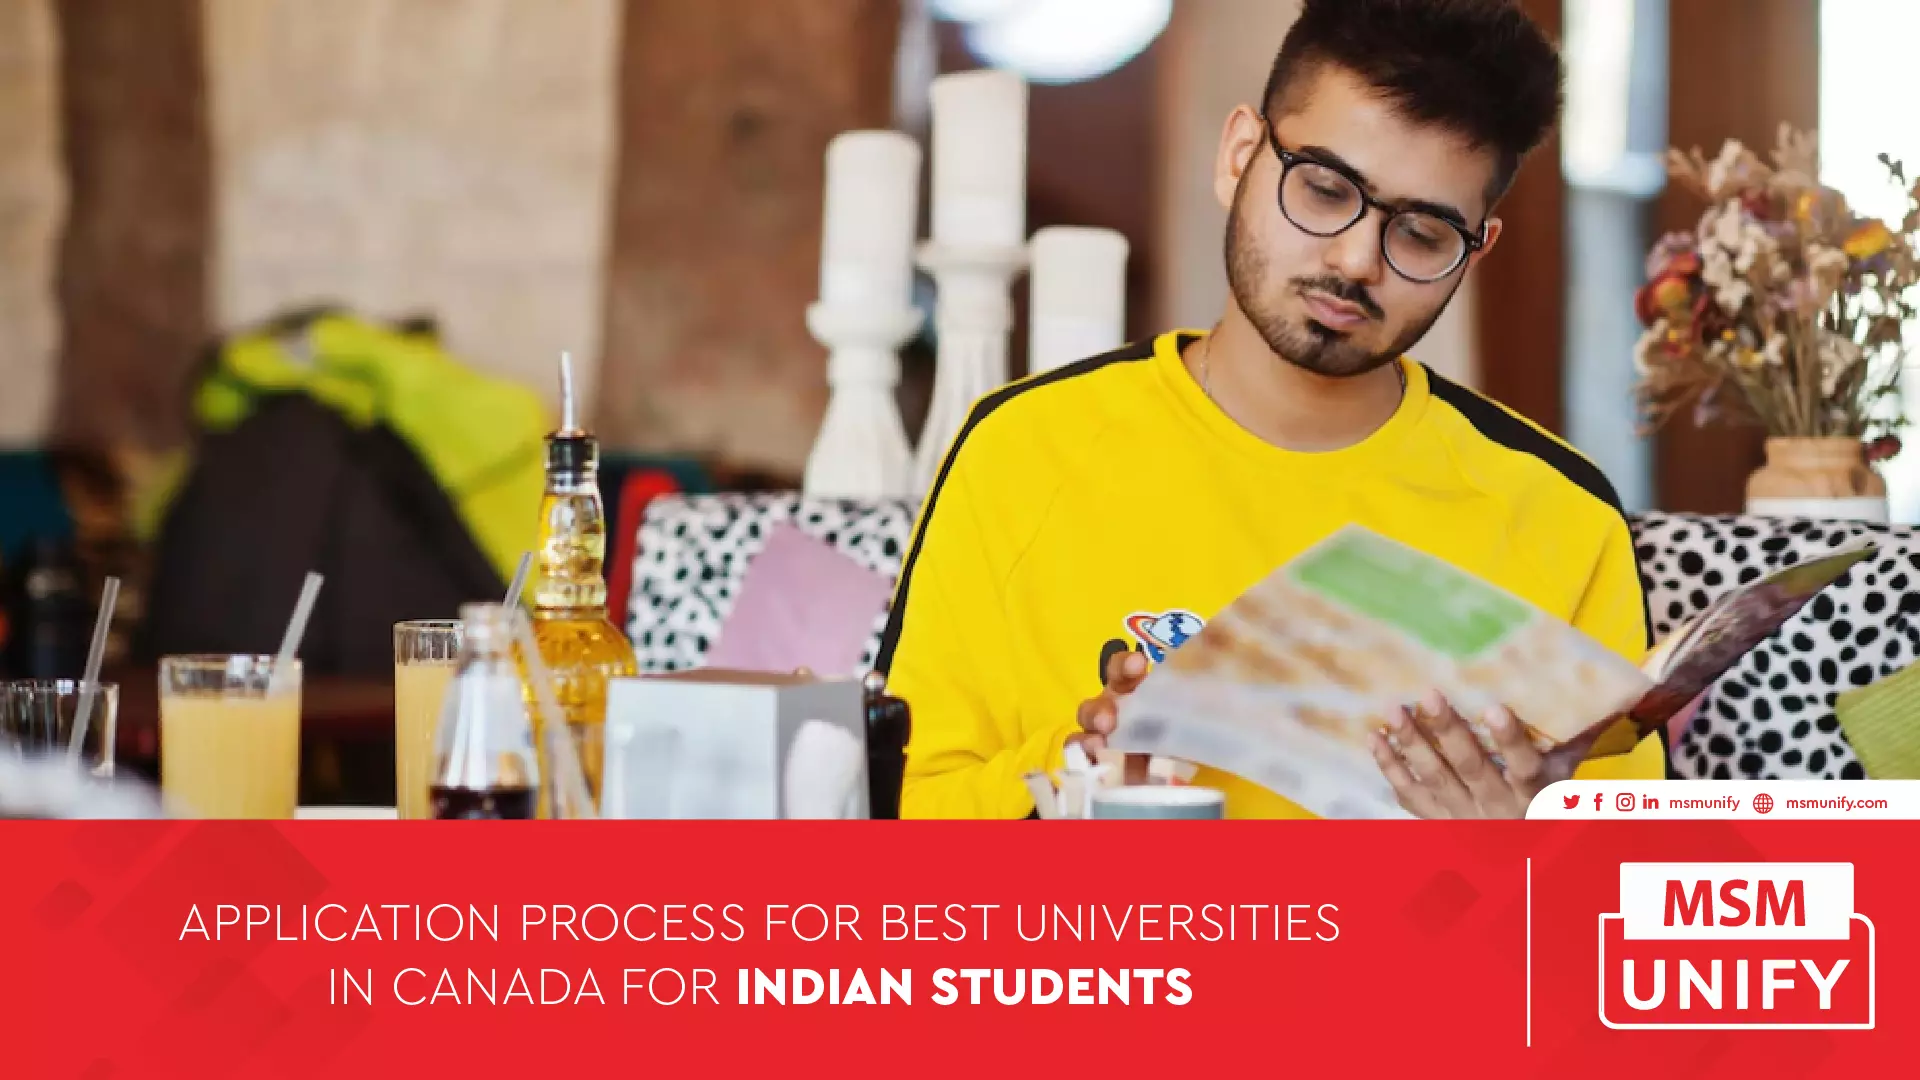 122822 MSM Unify Application procees for best universities in Canada for Indian Students 01